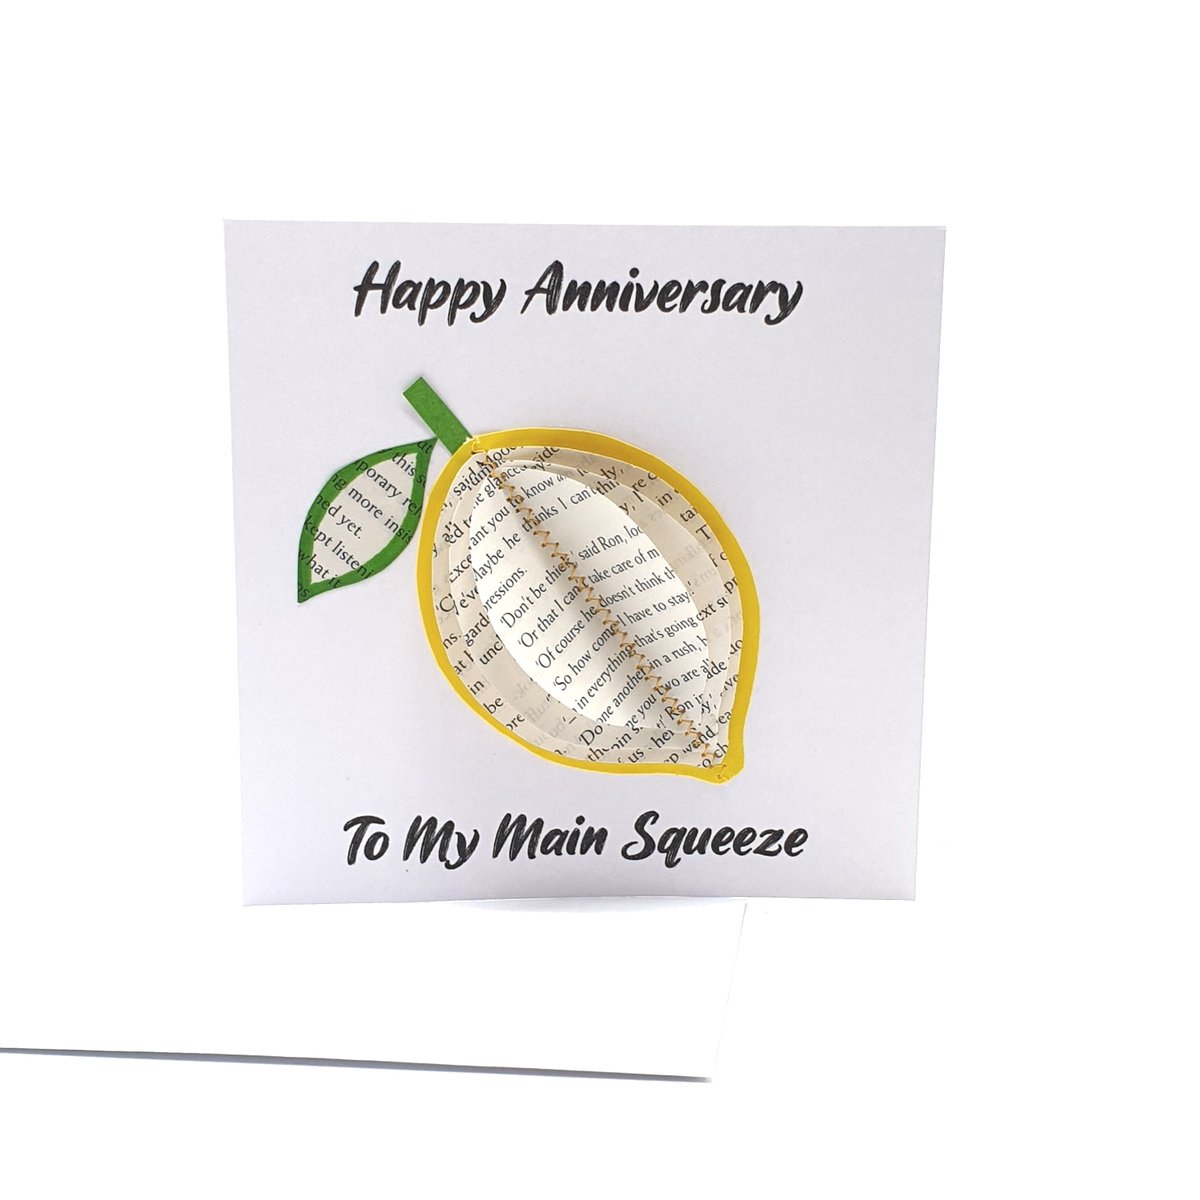 Lemon Card Gift creatoncrafts.com/products/lemon… #CreatonCrafts #mhhsbd #Shopify #4thAnniversaryCard